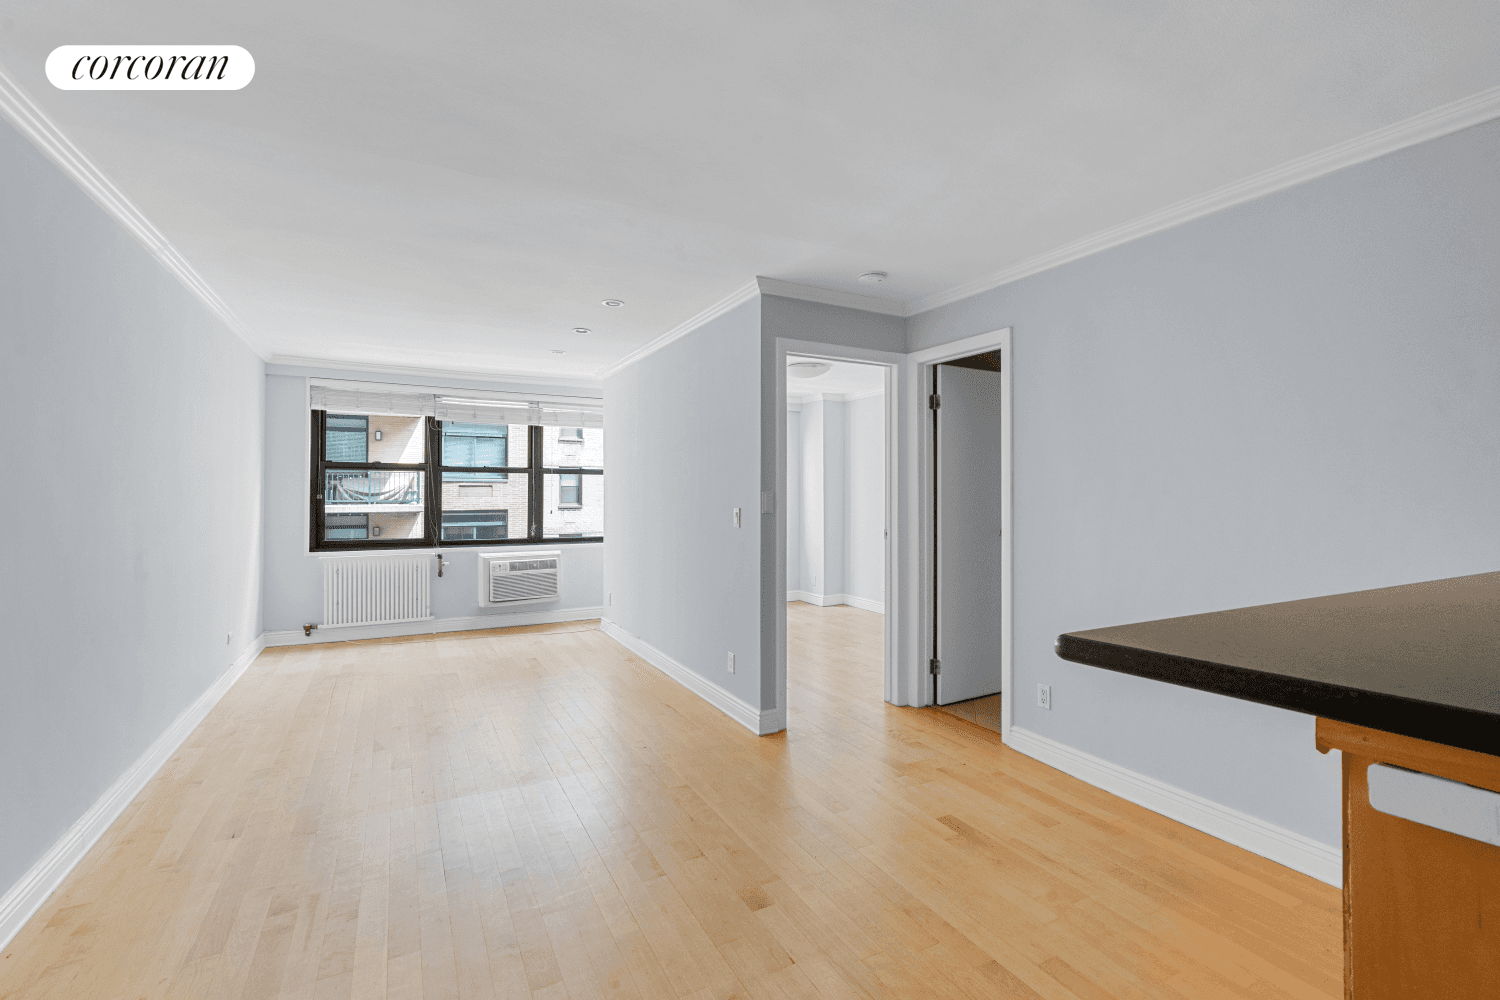 Be amazed by this cozy one bedroom in the heart of midtown.